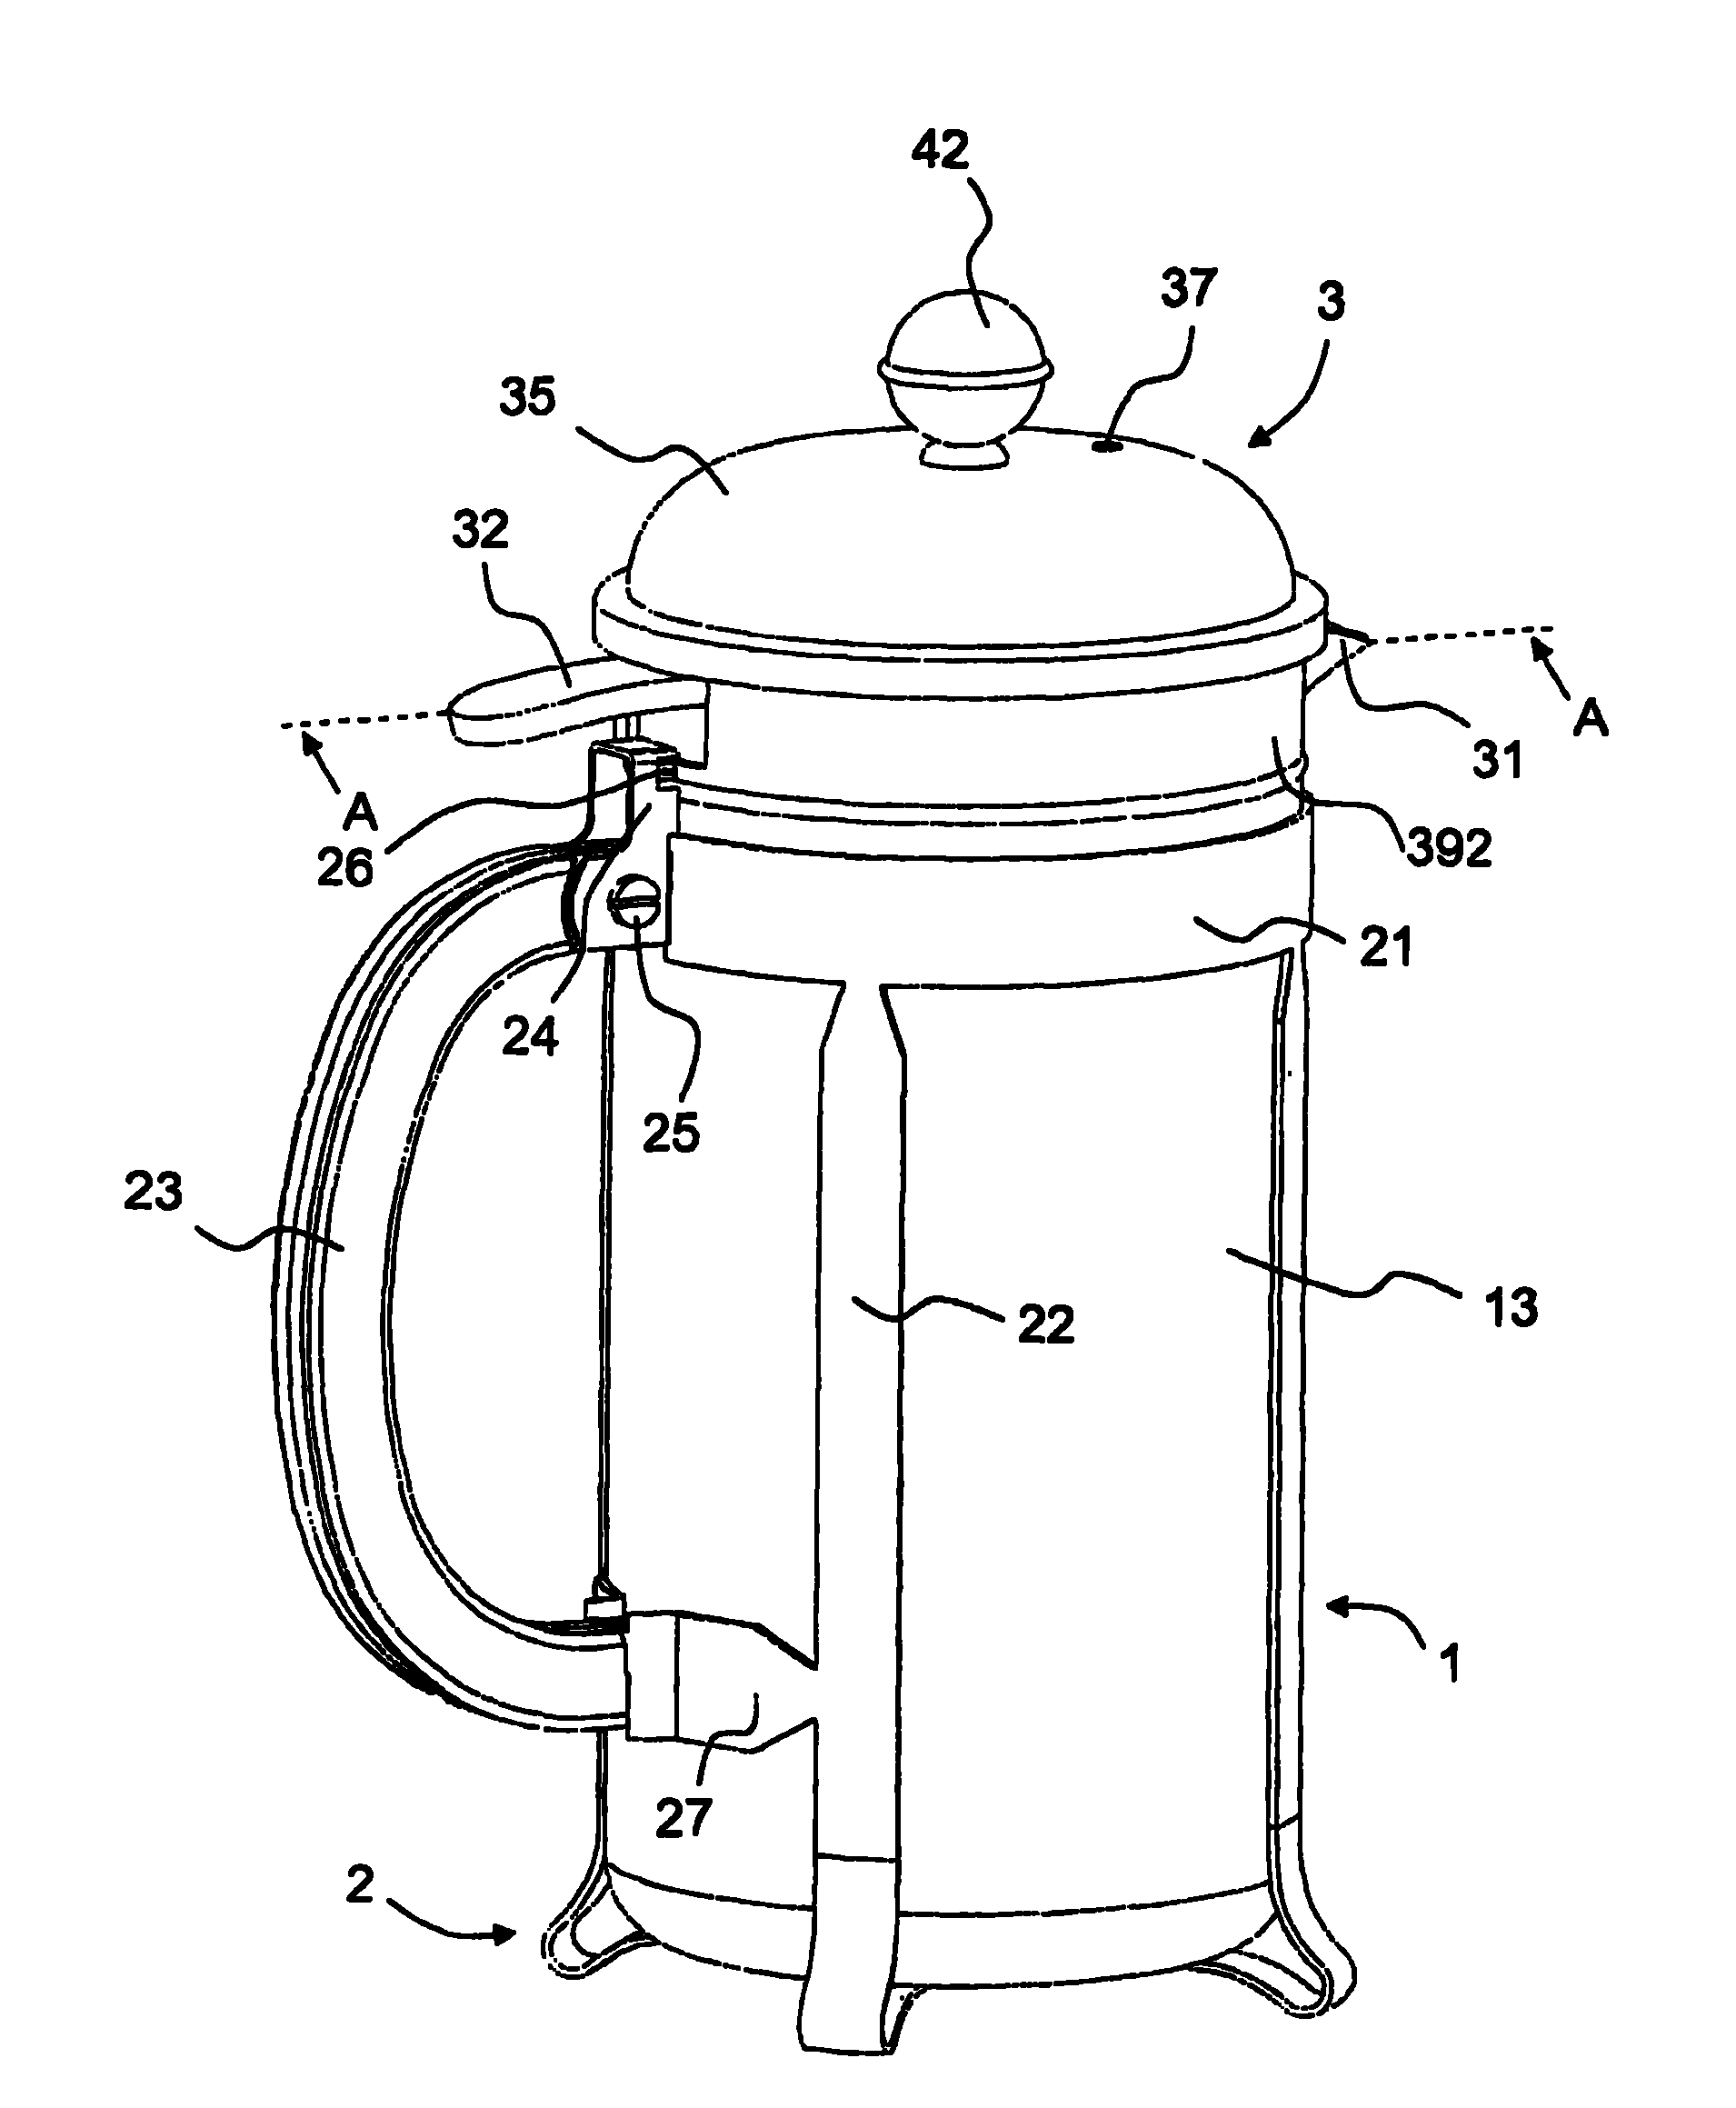 Beverage preparation device comprising an insert inserted into a receptacle